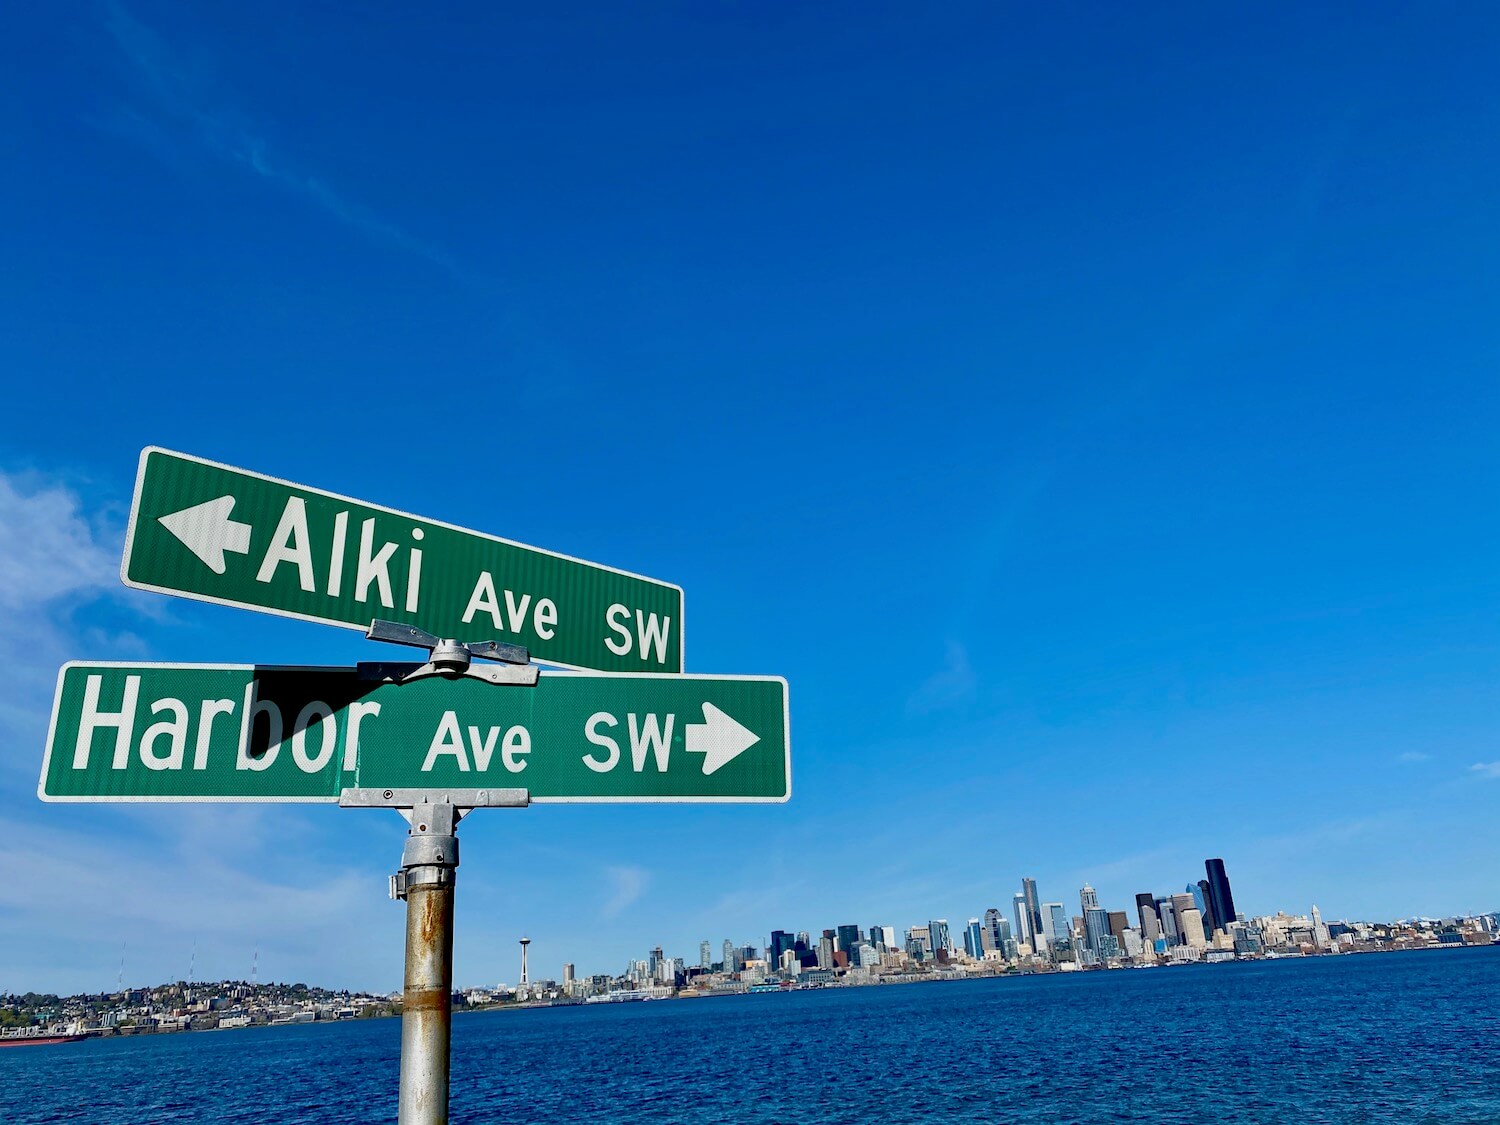 Alki Beach is a fun thing to do in West Seattle because the views of the city are so magnificent. This shot shows two green street signs with white print saying "Alki Ave SW" and "Harbor Ave SW" while the expansive Downtown Seattle commands the background, across the bay. The sky is bright blue.